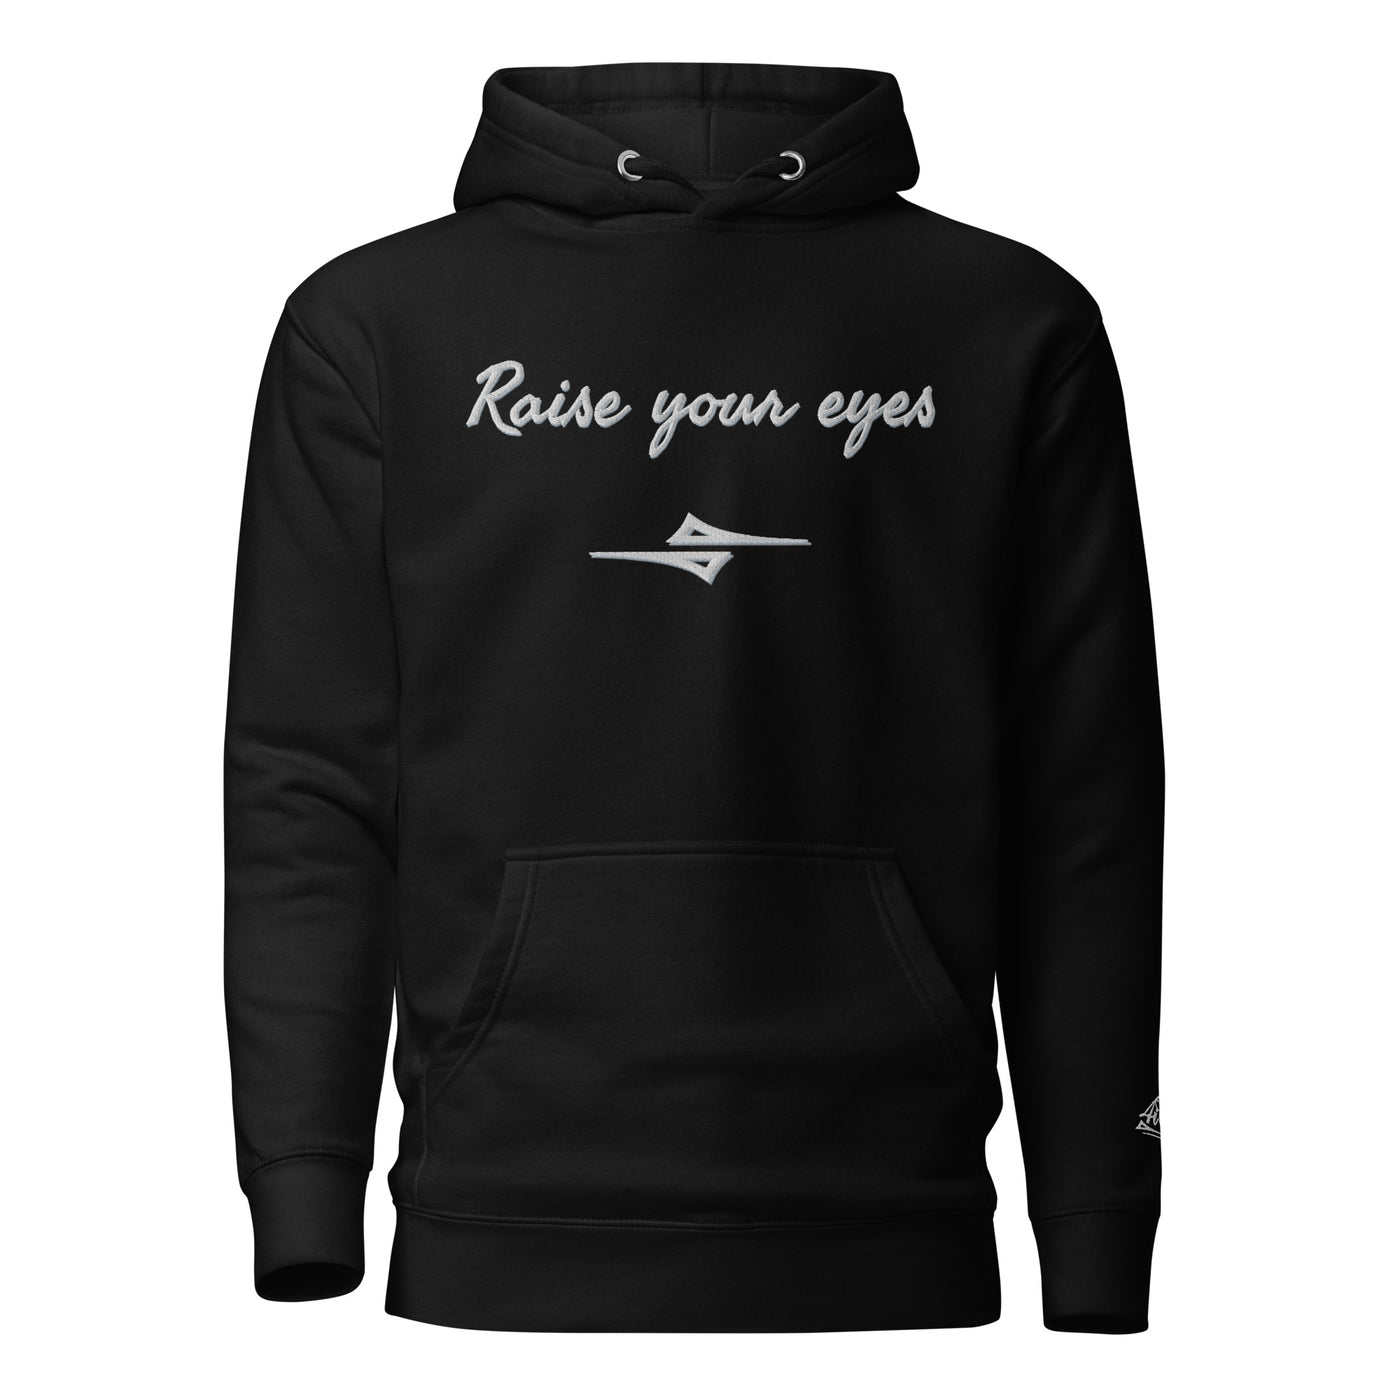 4iCe Raise your eyes Embroidered Hoodie